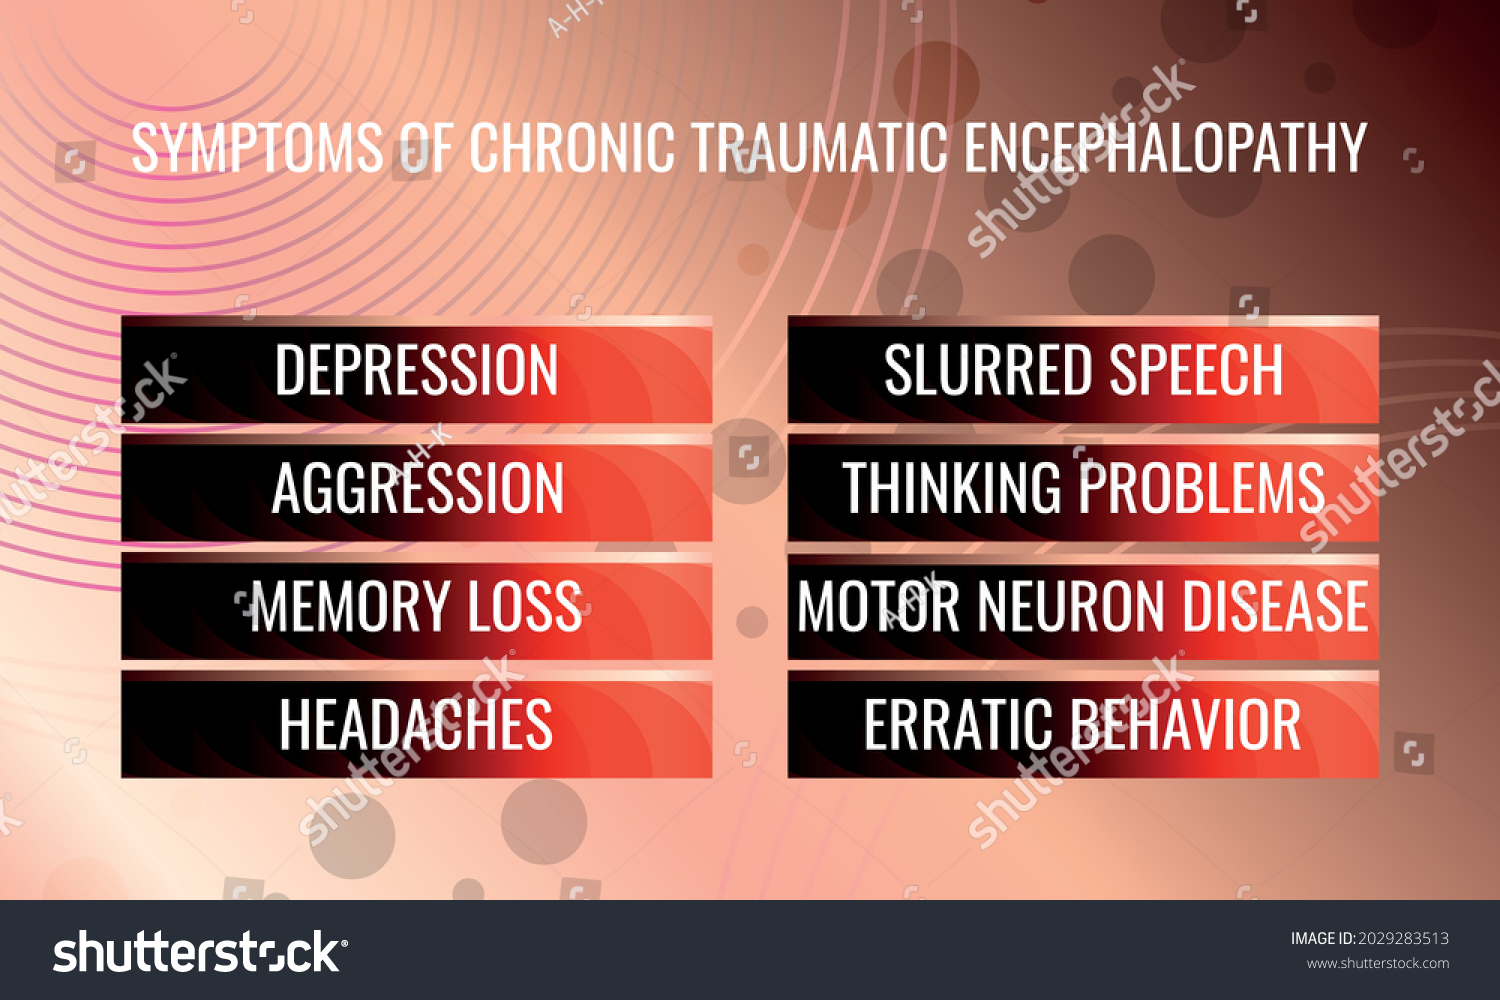 SVG of symptoms of Chronic traumatic encephalopathy. Vector illustration for medical journal or brochure. svg